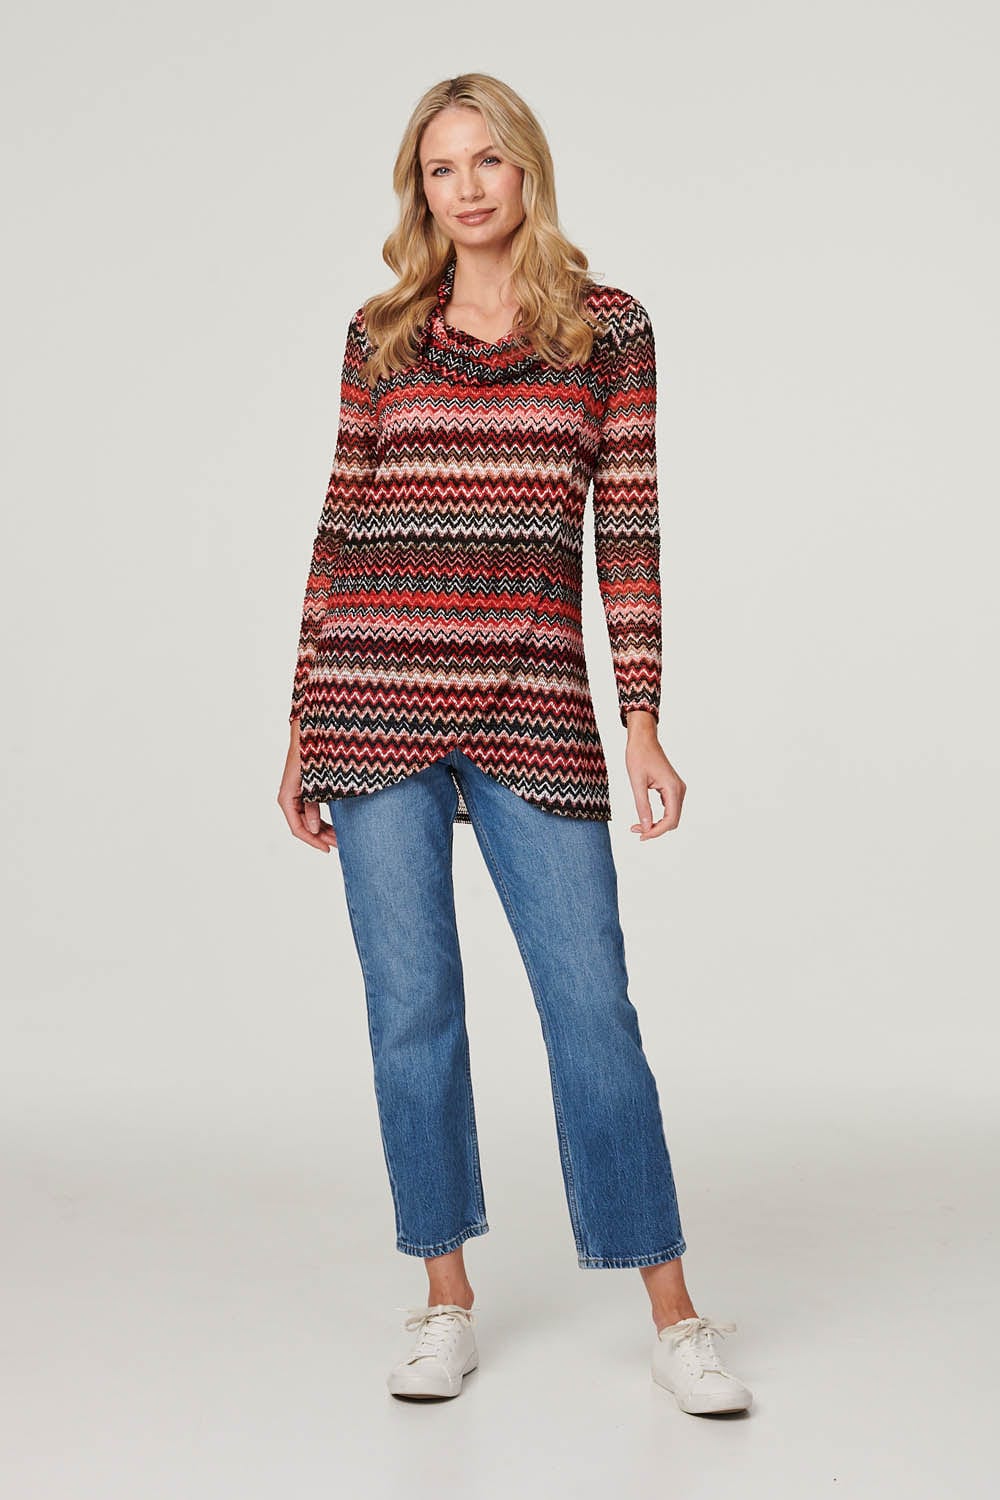 Red | Chevron Print Cowl Neck Top : Model is 5'10"/178 cm and wears UK10/EU38/US6/AUS10